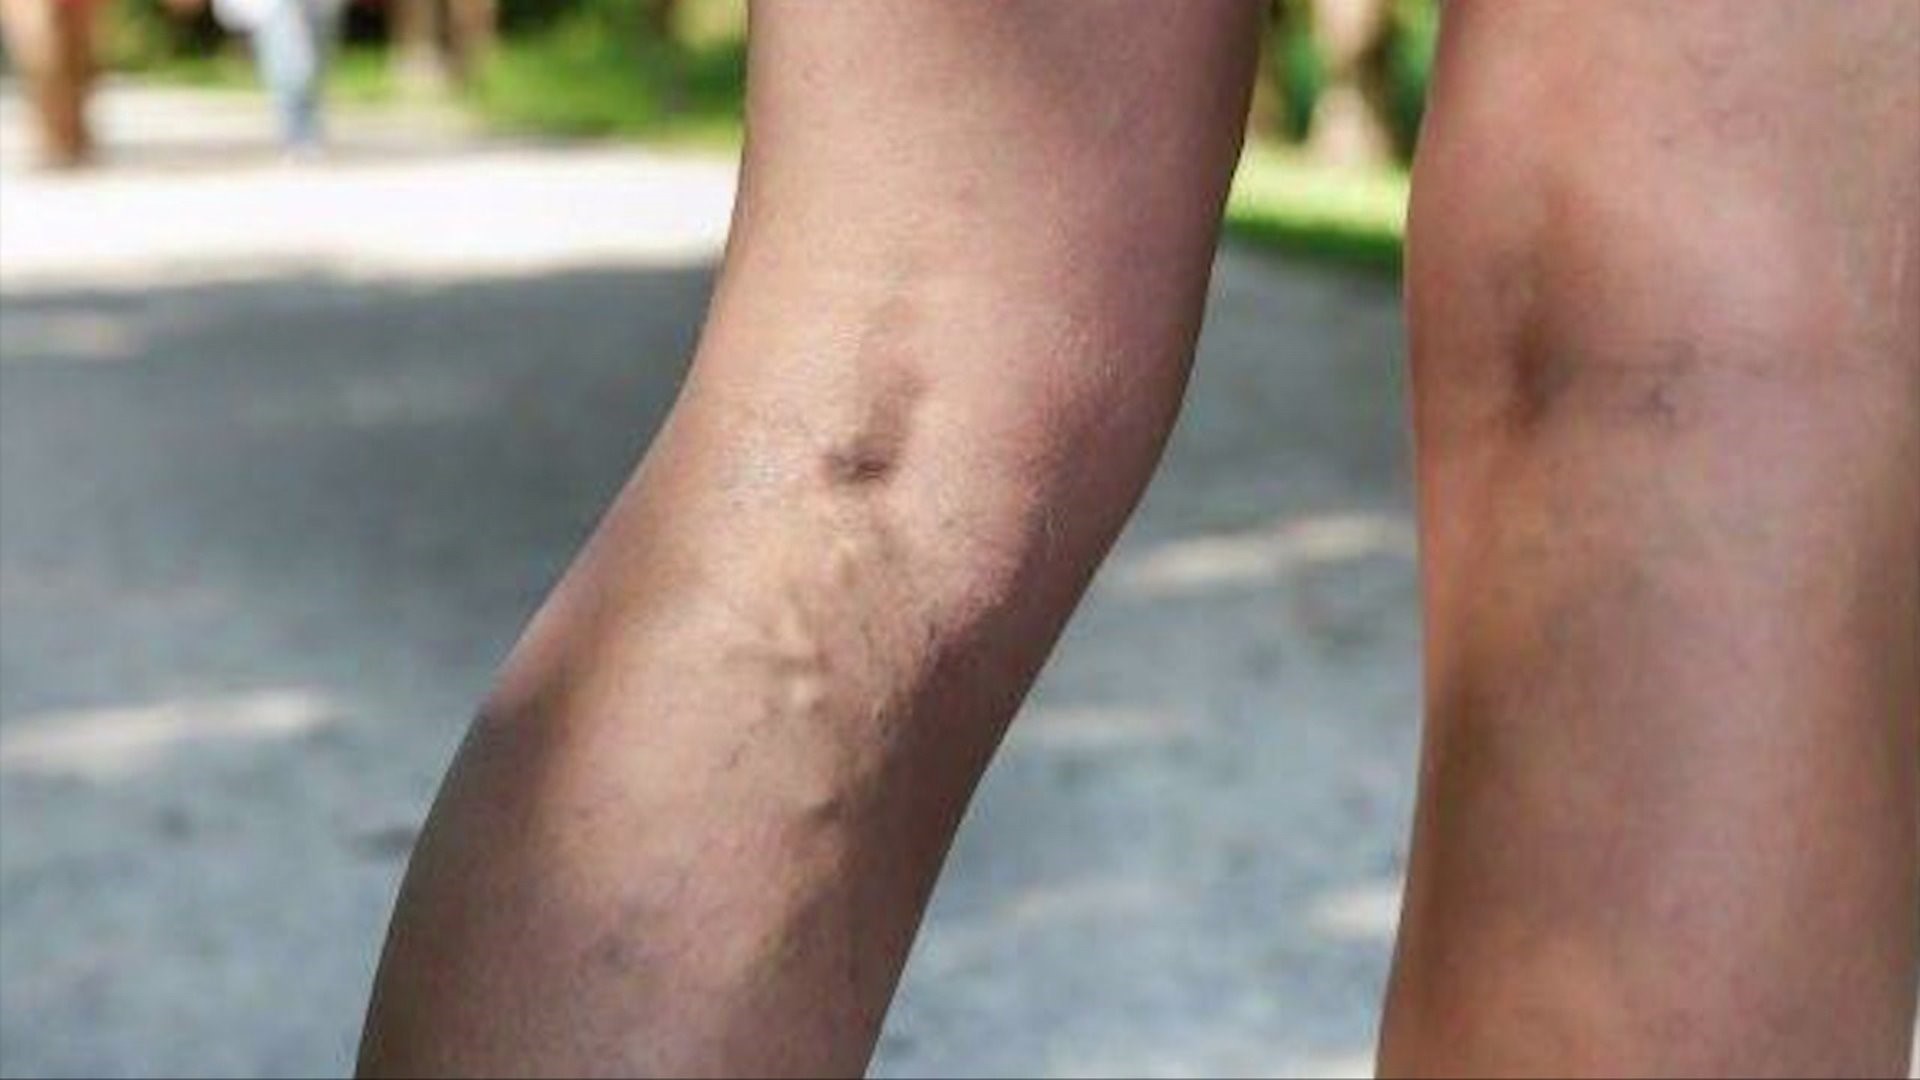 YOUR HEALTH: A new fix for the old problem of varicose veins